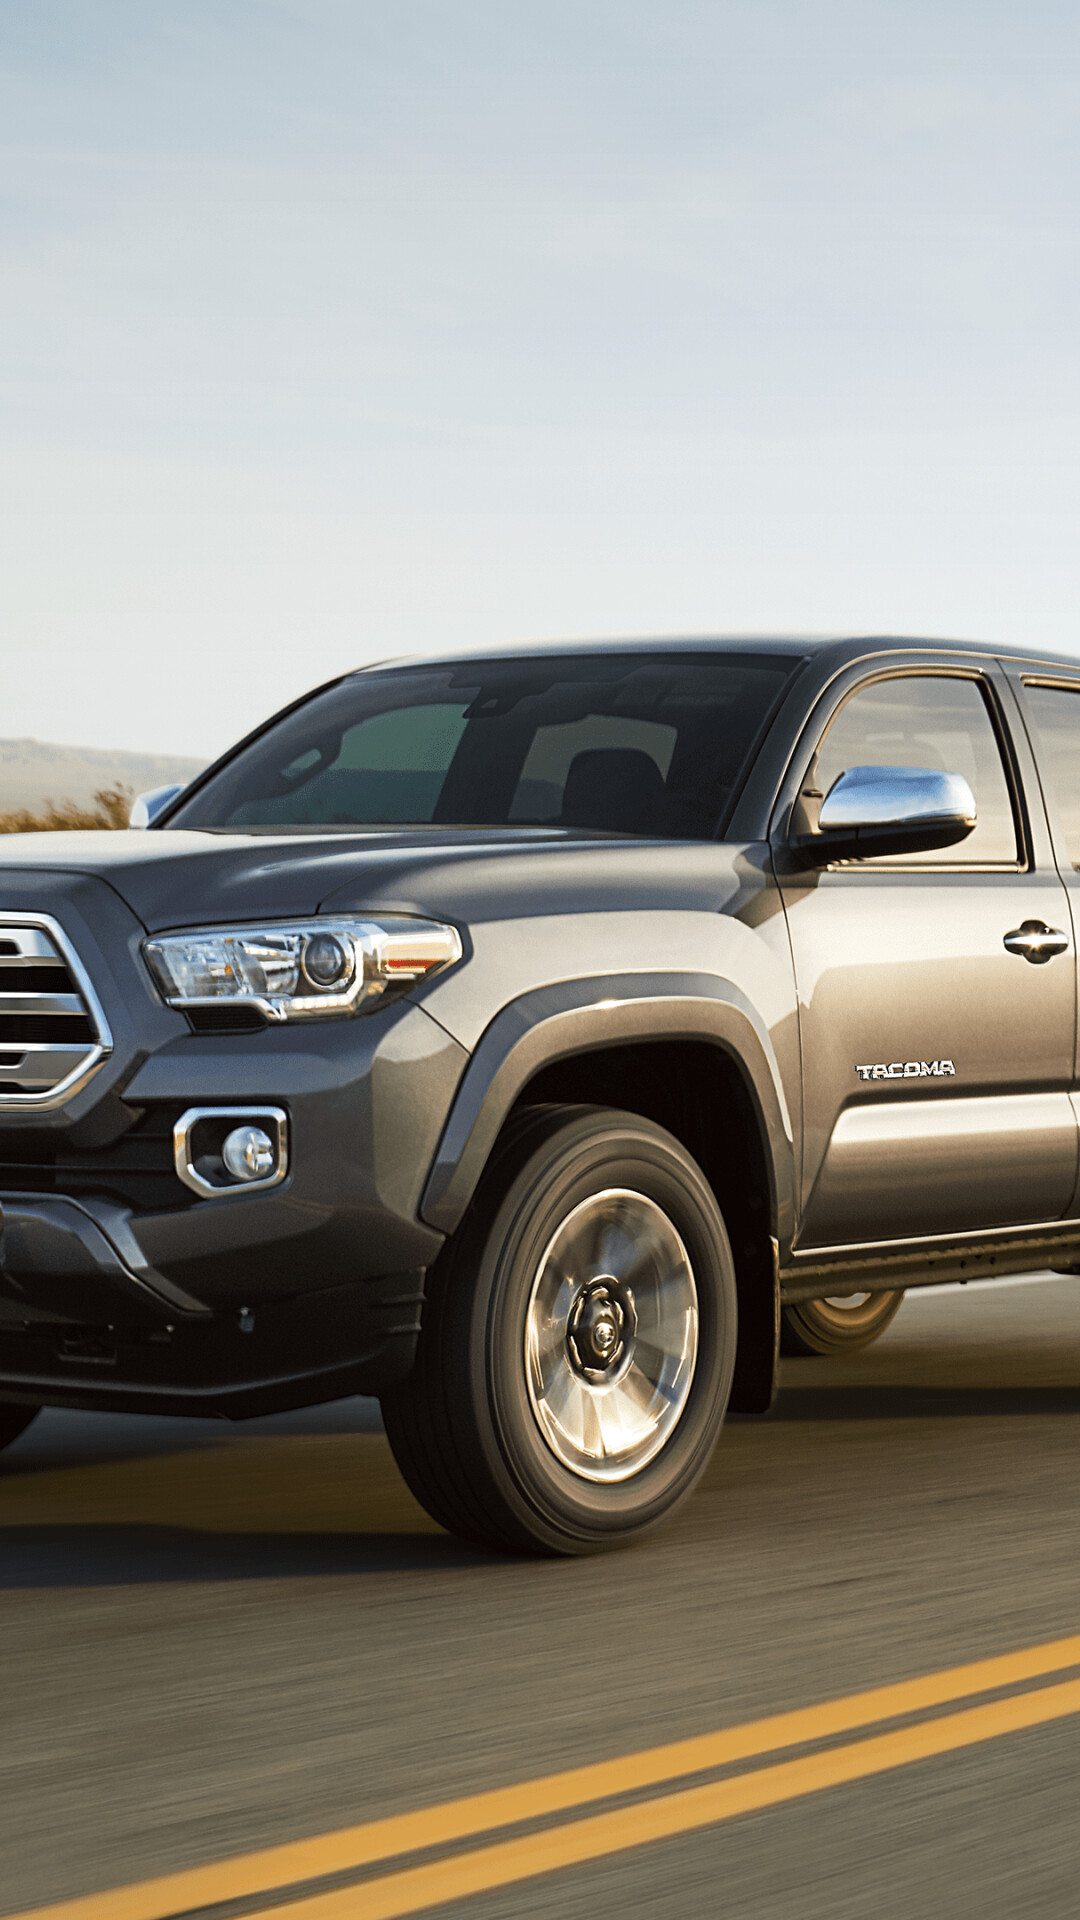 Toyota Tacoma: The second and third generations are classified as mid-sized pickups. 1080x1920 Full HD Wallpaper.